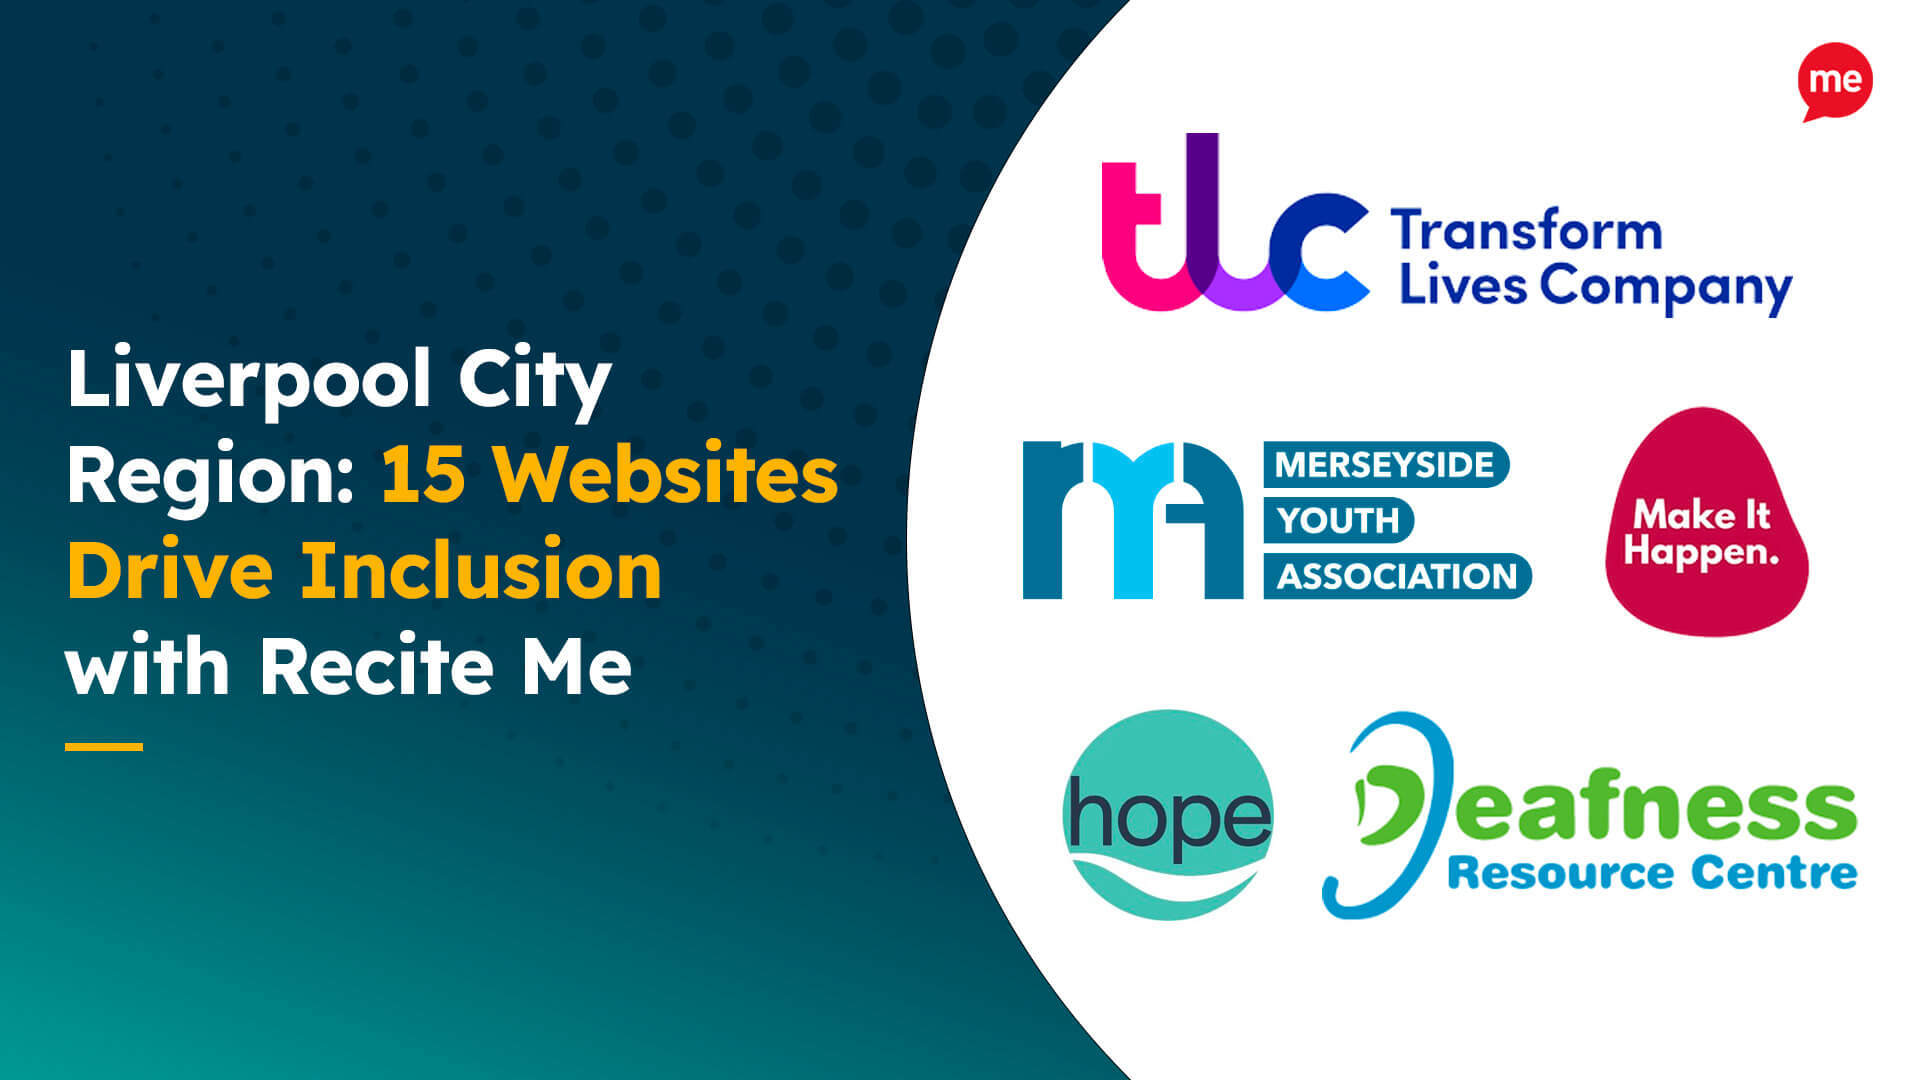 Liverpool City Region: 15 Websites Drive Inclusion with Recite Me